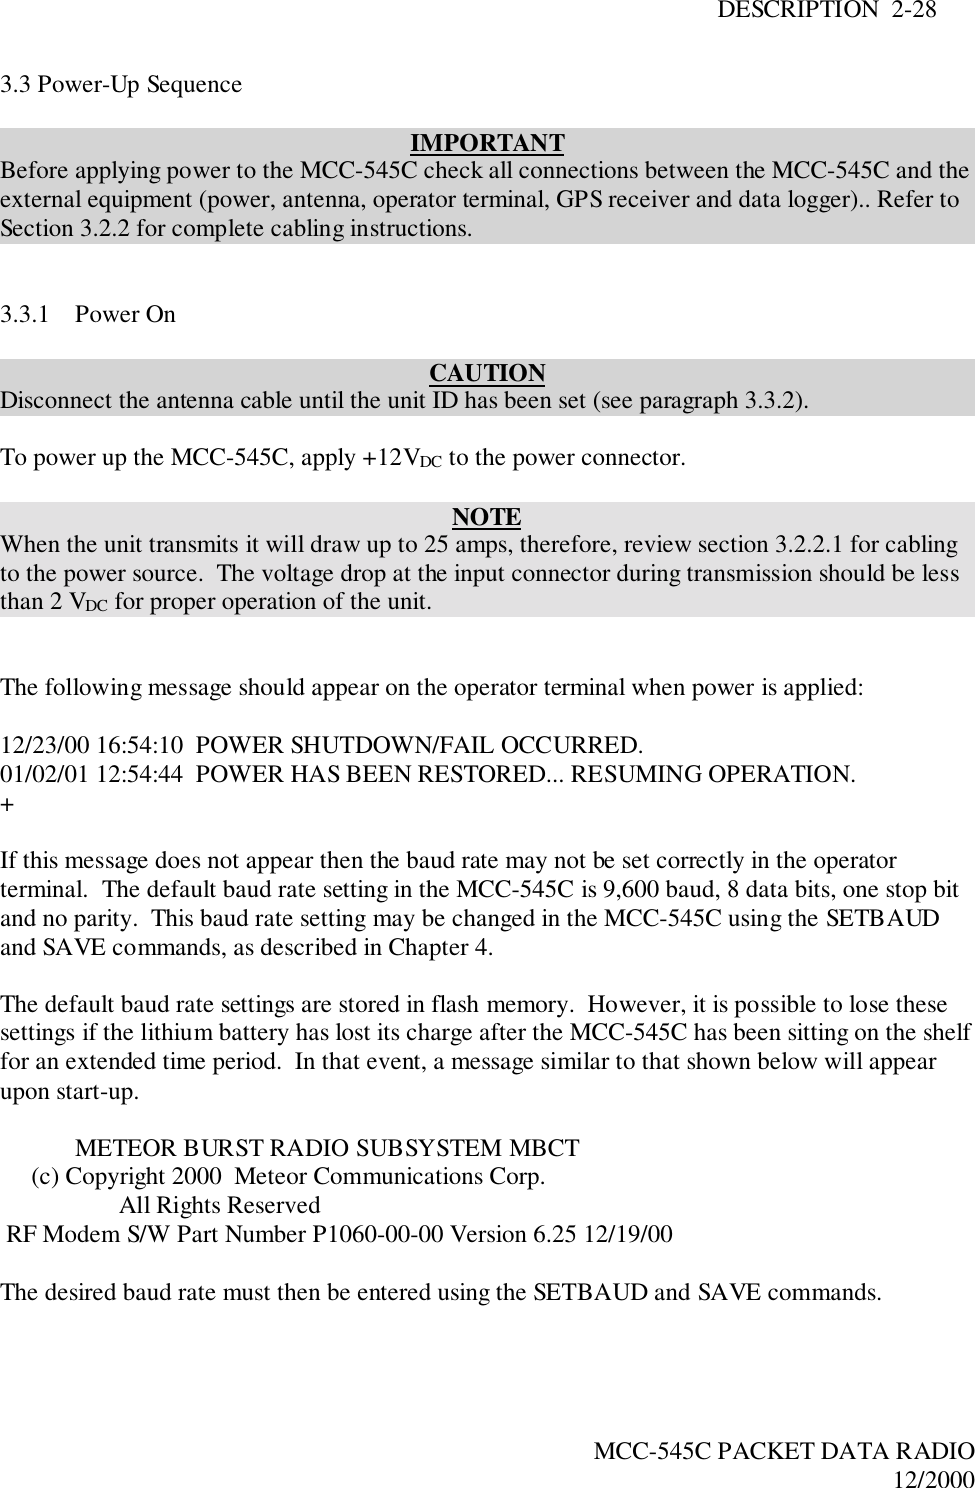 DESCRIPTION  2-28MCC-545C PACKET DATA RADIO12/20003.3 Power-Up SequenceIMPORTANTBefore applying power to the MCC-545C check all connections between the MCC-545C and theexternal equipment (power, antenna, operator terminal, GPS receiver and data logger).. Refer toSection 3.2.2 for complete cabling instructions.3.3.1 Power OnCAUTIONDisconnect the antenna cable until the unit ID has been set (see paragraph 3.3.2).To power up the MCC-545C, apply +12VDC to the power connector.NOTEWhen the unit transmits it will draw up to 25 amps, therefore, review section 3.2.2.1 for cablingto the power source.  The voltage drop at the input connector during transmission should be lessthan 2 VDC for proper operation of the unit.The following message should appear on the operator terminal when power is applied:12/23/00 16:54:10  POWER SHUTDOWN/FAIL OCCURRED.01/02/01 12:54:44  POWER HAS BEEN RESTORED... RESUMING OPERATION.+If this message does not appear then the baud rate may not be set correctly in the operatorterminal.  The default baud rate setting in the MCC-545C is 9,600 baud, 8 data bits, one stop bitand no parity.  This baud rate setting may be changed in the MCC-545C using the SETBAUDand SAVE commands, as described in Chapter 4.The default baud rate settings are stored in flash memory.  However, it is possible to lose thesesettings if the lithium battery has lost its charge after the MCC-545C has been sitting on the shelffor an extended time period.  In that event, a message similar to that shown below will appearupon start-up.            METEOR BURST RADIO SUBSYSTEM MBCT     (c) Copyright 2000  Meteor Communications Corp.                   All Rights Reserved RF Modem S/W Part Number P1060-00-00 Version 6.25 12/19/00The desired baud rate must then be entered using the SETBAUD and SAVE commands.